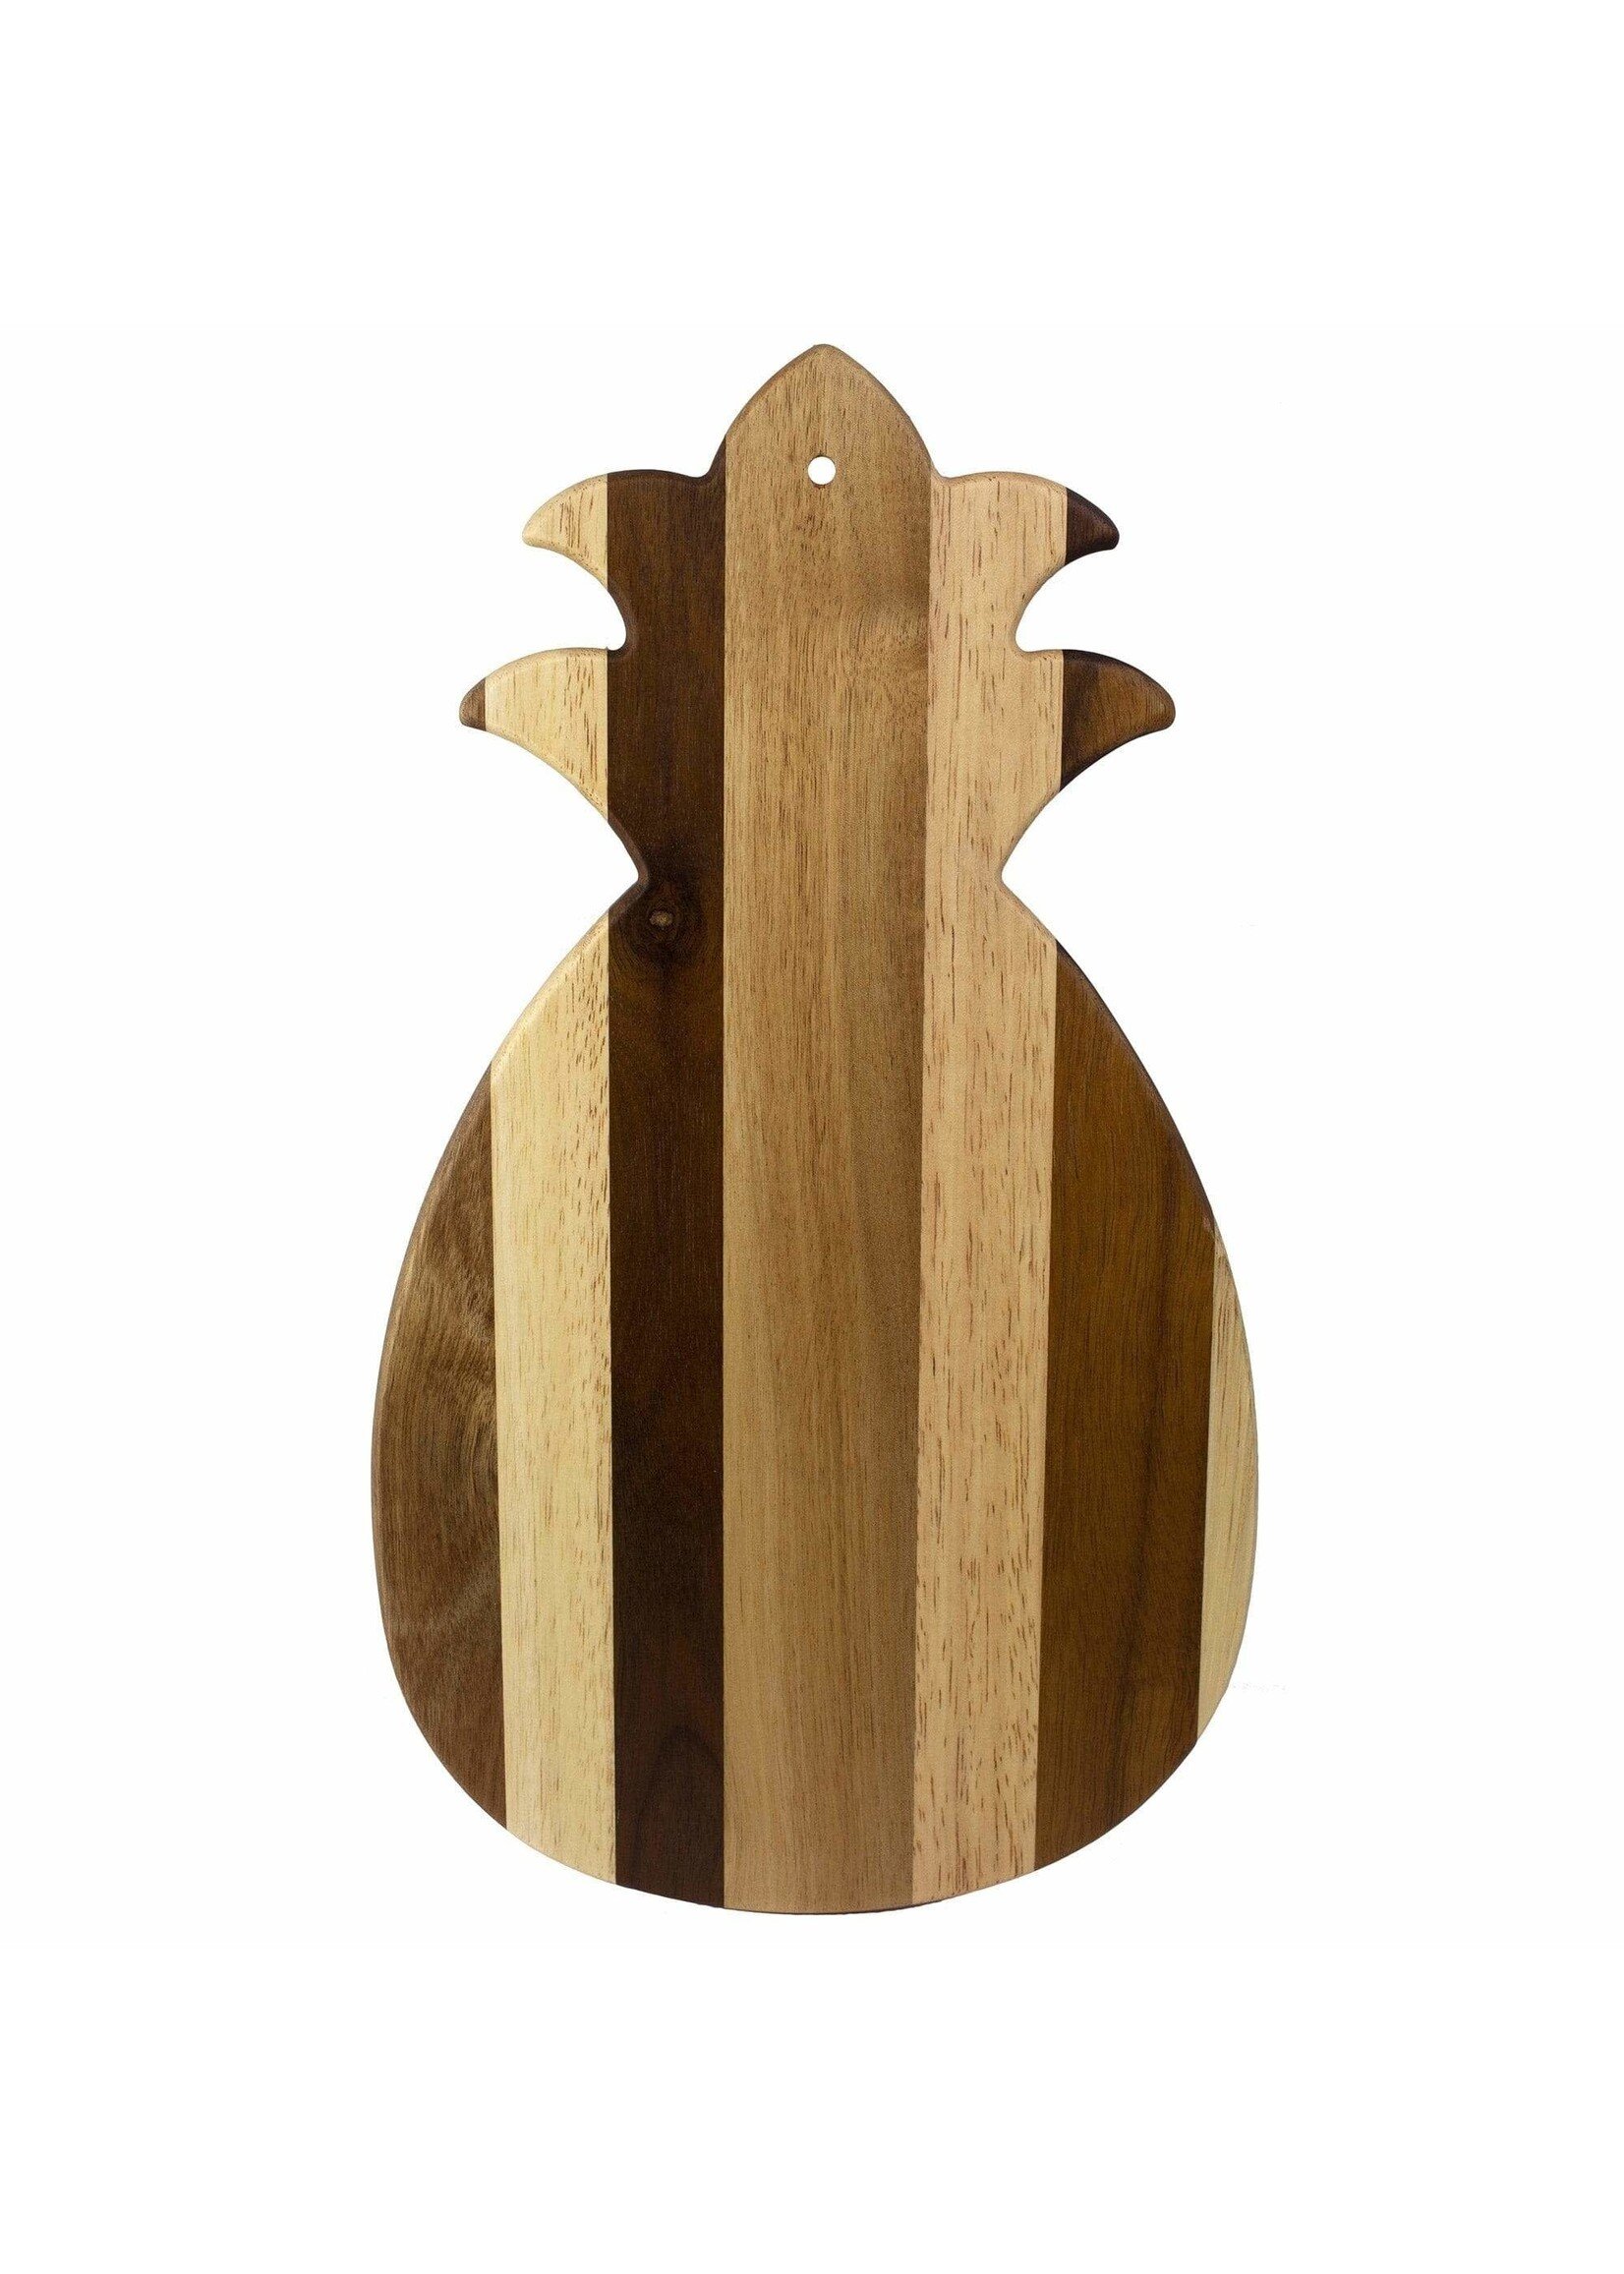 Totally Bamboo Rock & Branch Pineapple Board